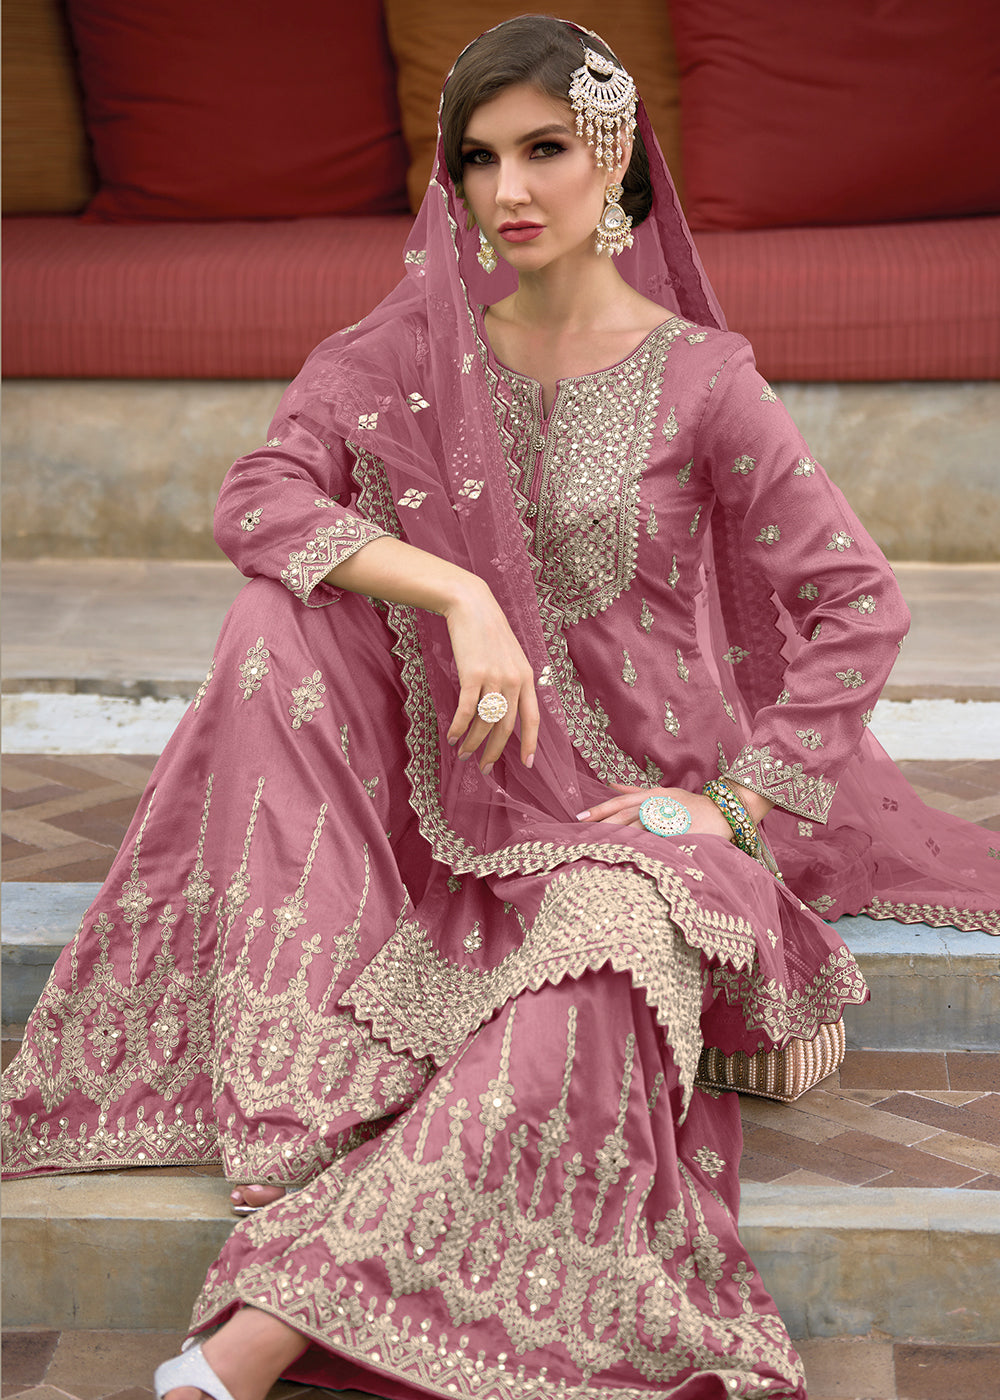 Shop Now Festive Amazing Soft Pink Heavy Silk Sharara Suit Online at Empress Clothing in USA, UK, Canada, Italy & Worldwide.